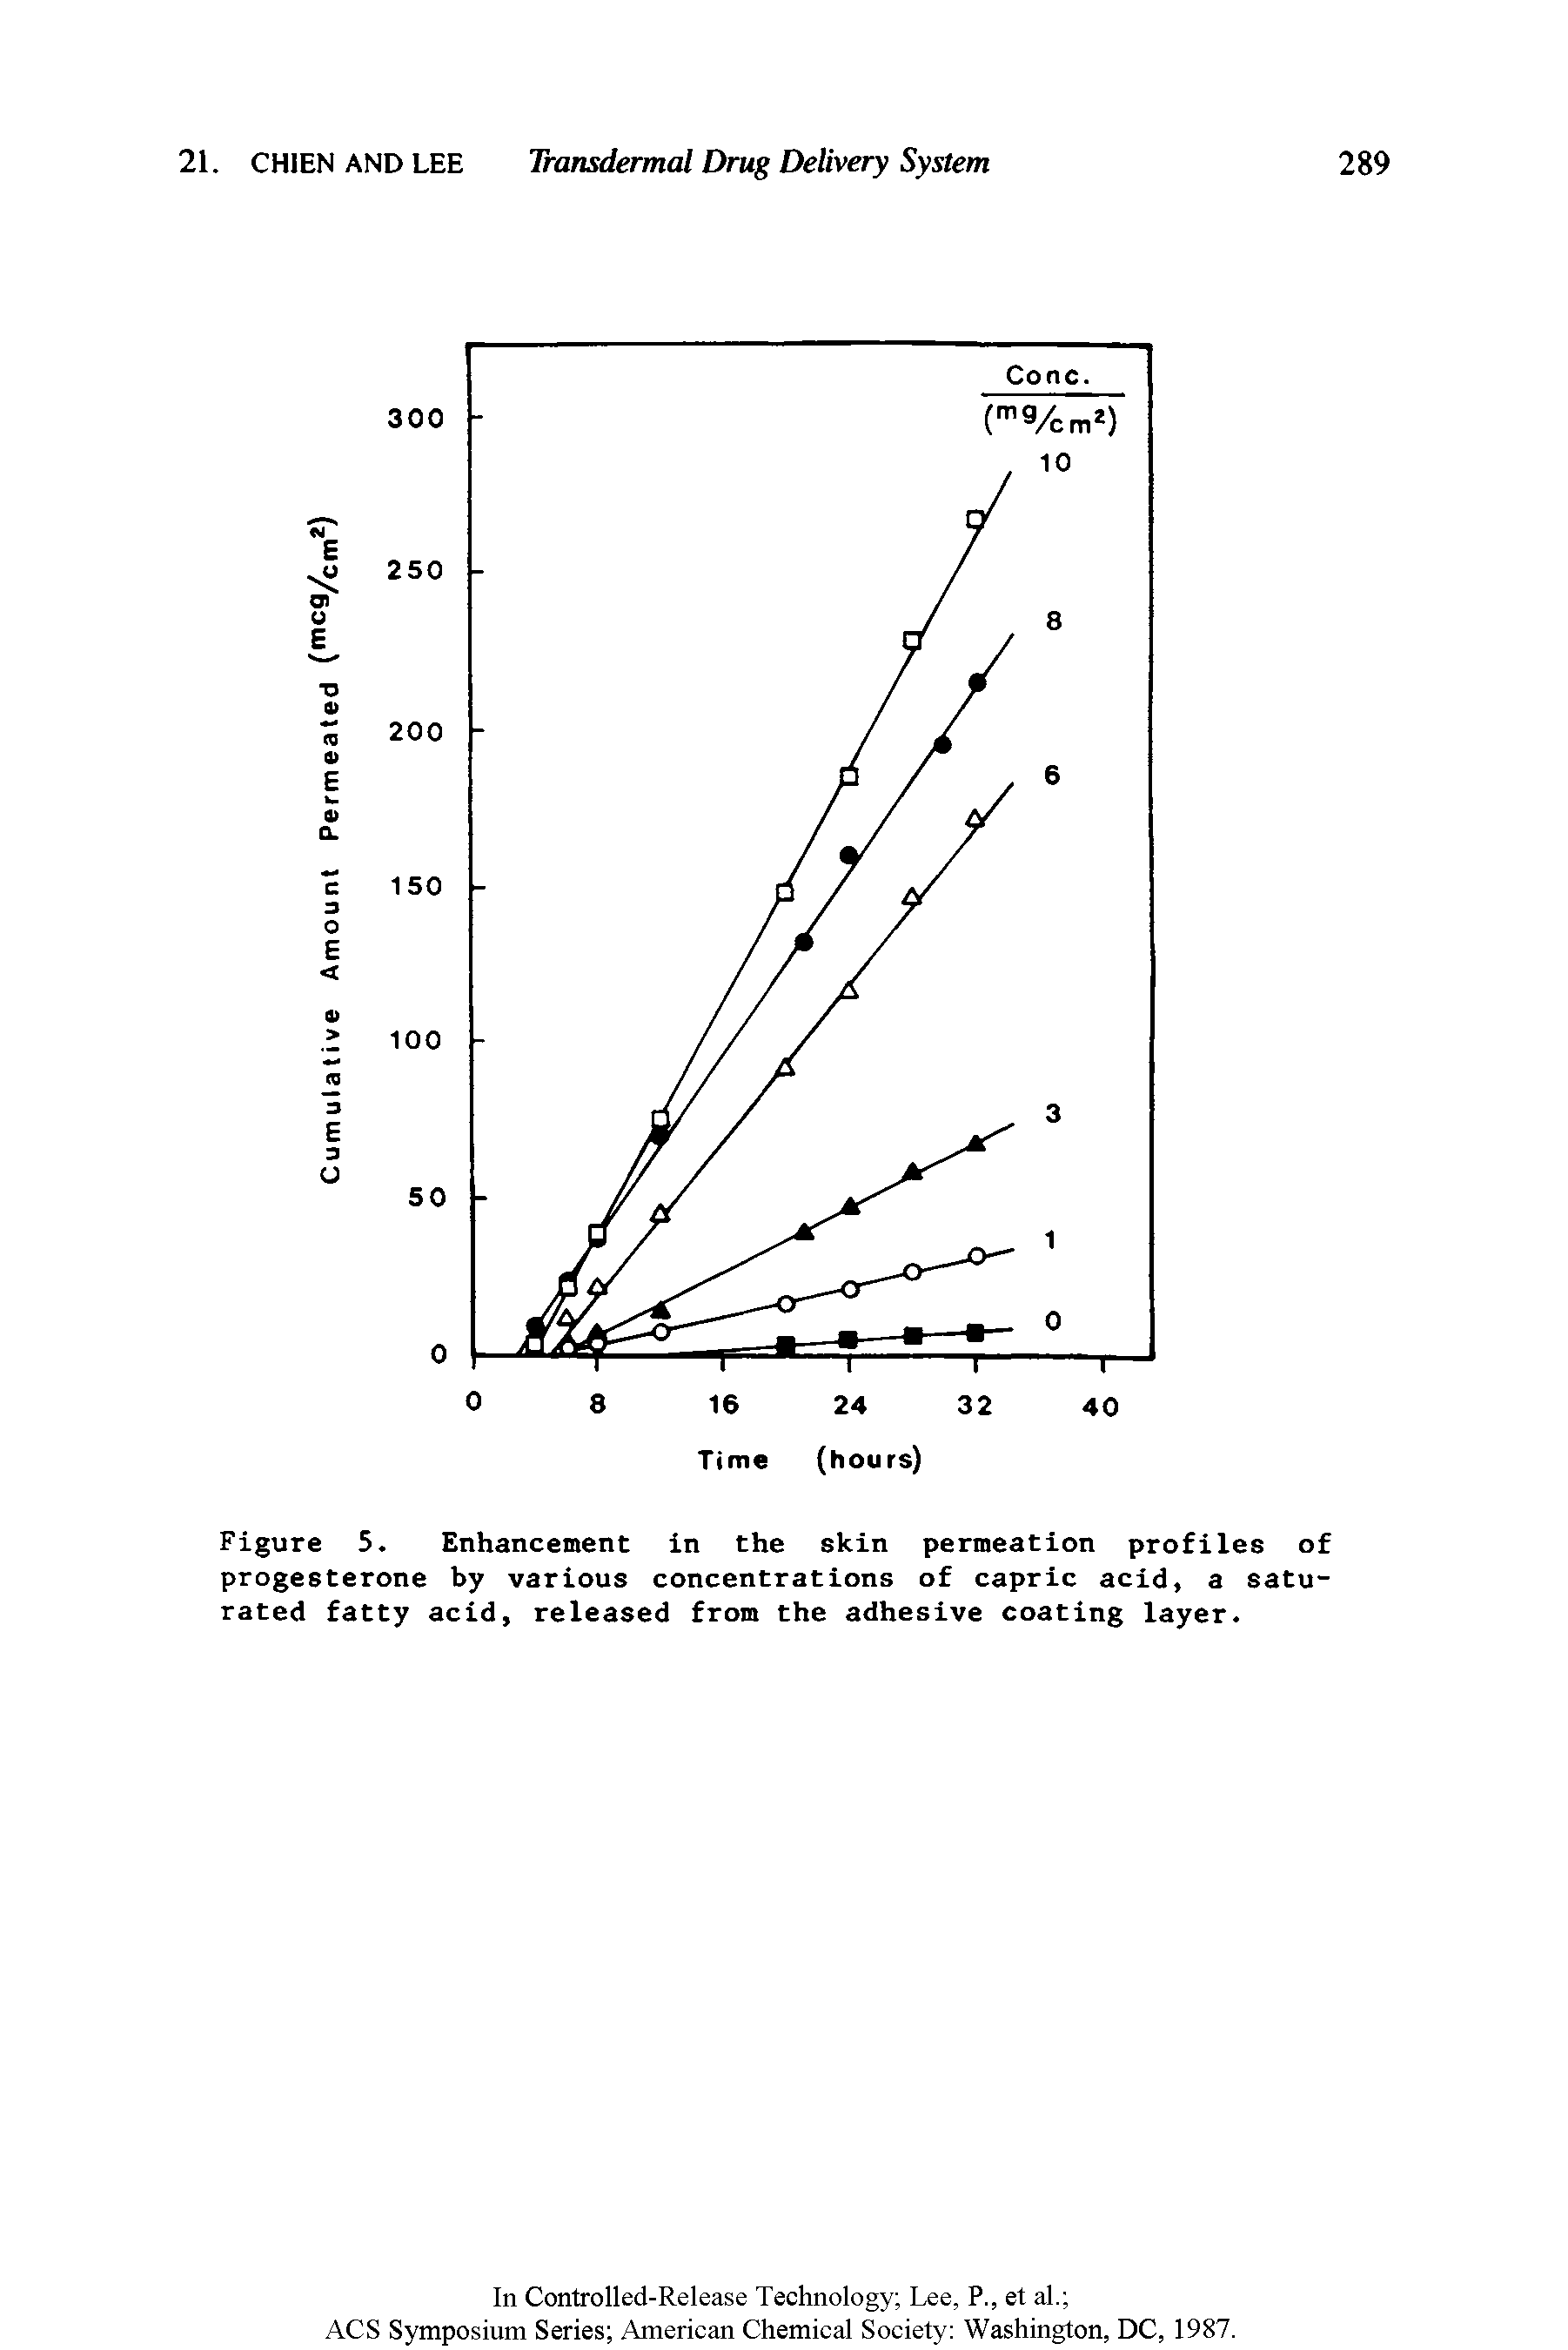 Figure 5. Enhancement in the skin permeation profiles of progesterone by various concentrations of capric acid, a saturated fatty acid, released from the adhesive coating layer.